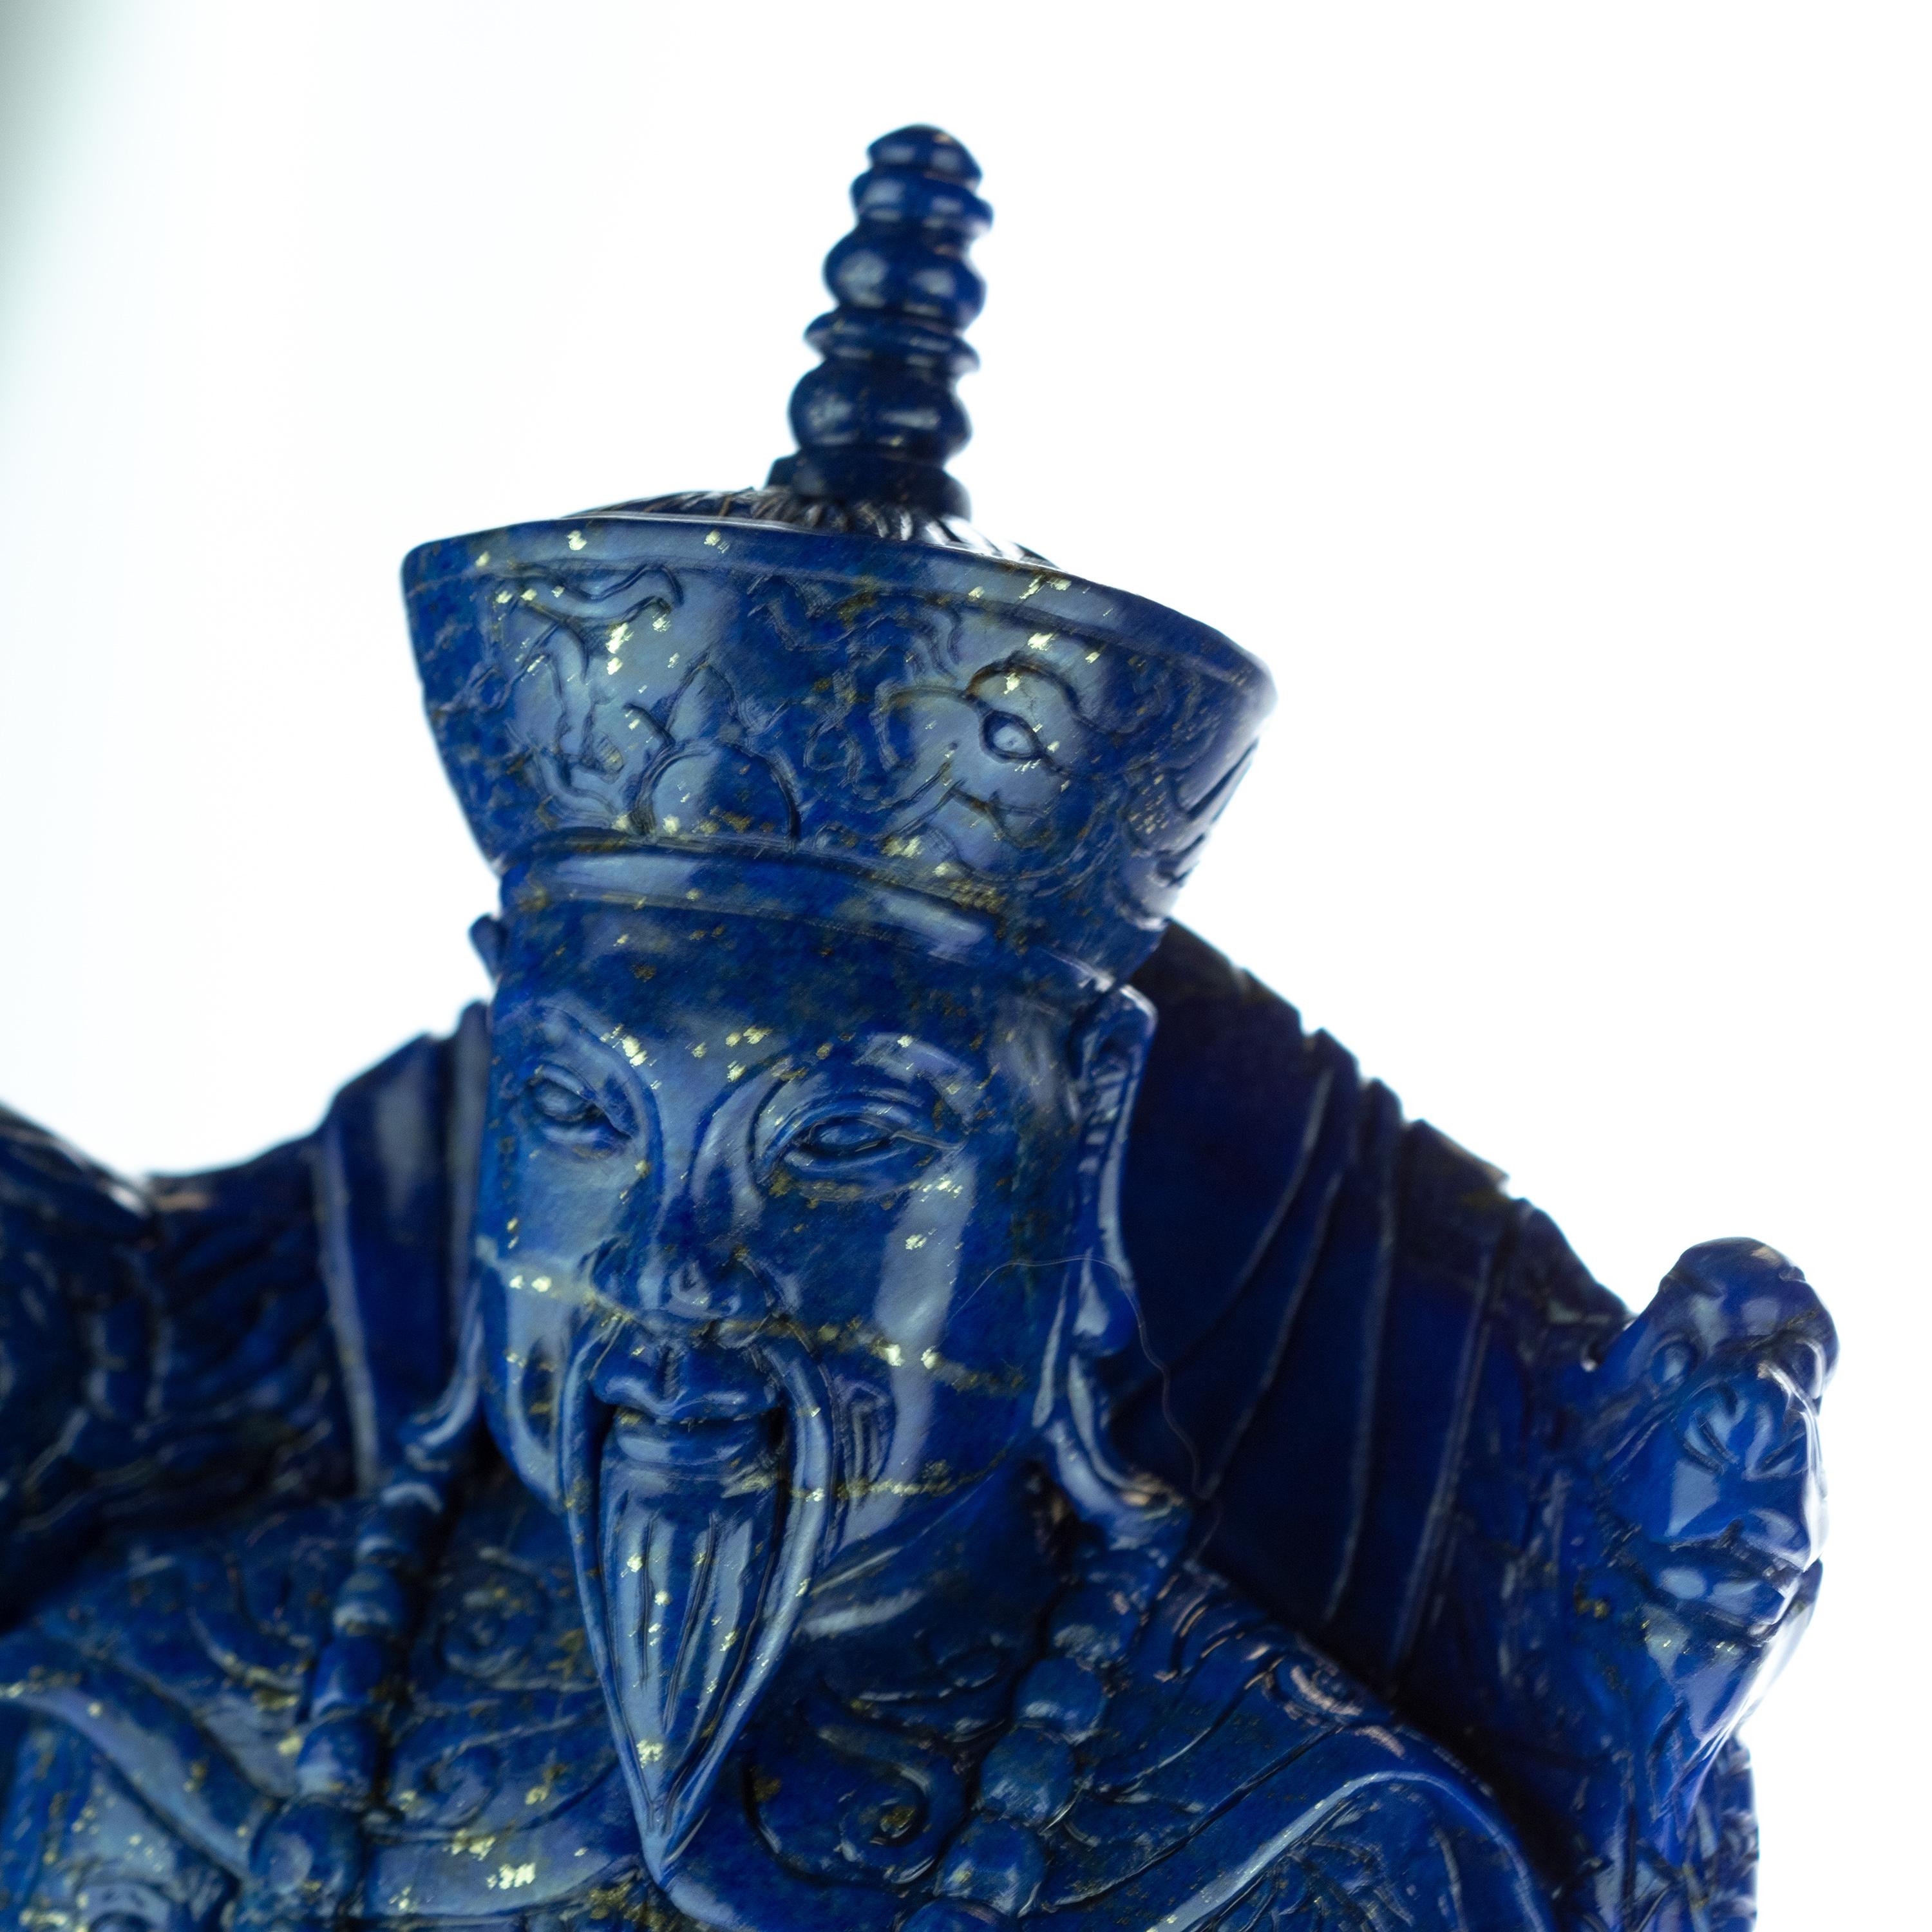 Lapis Lazuli King Queen Carved Blue Gemstone Artisanal Royalty Statue Sculpture For Sale 3